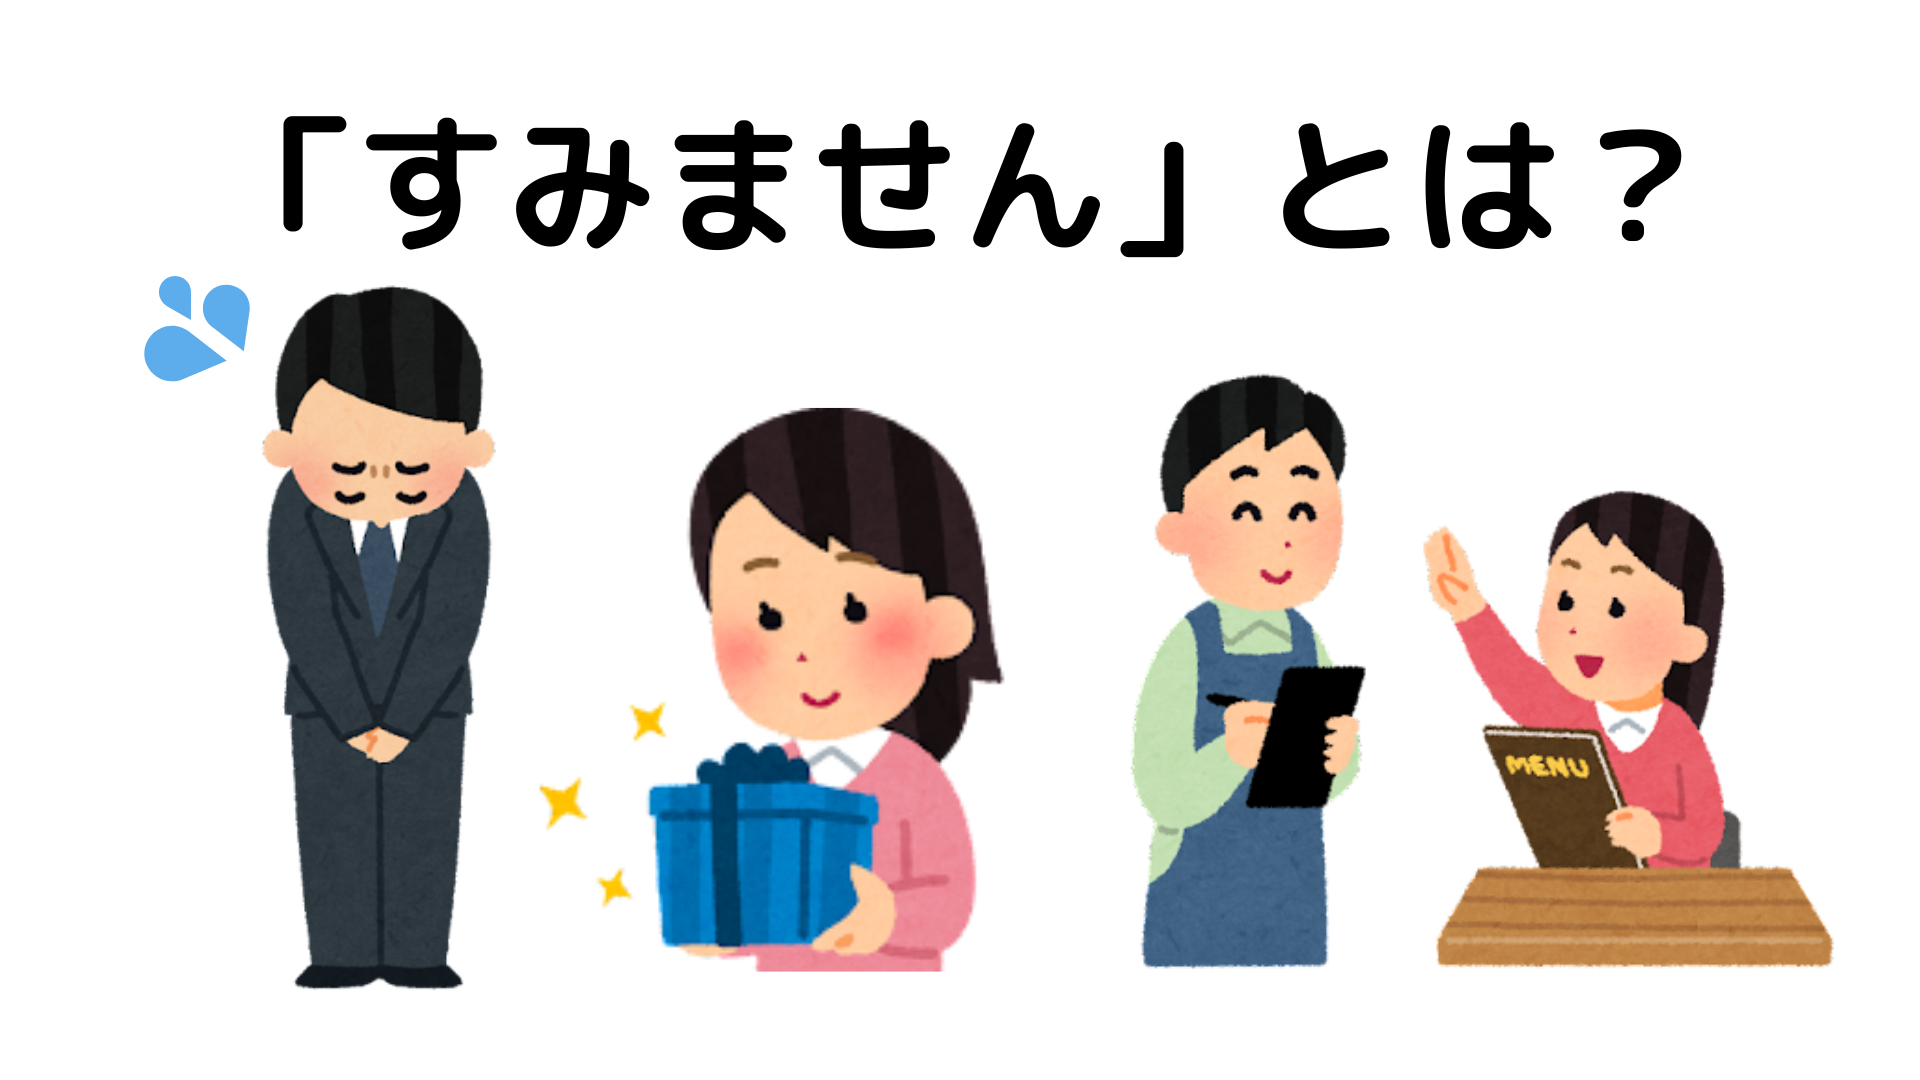 Do you know three different meanings of「すみません」？